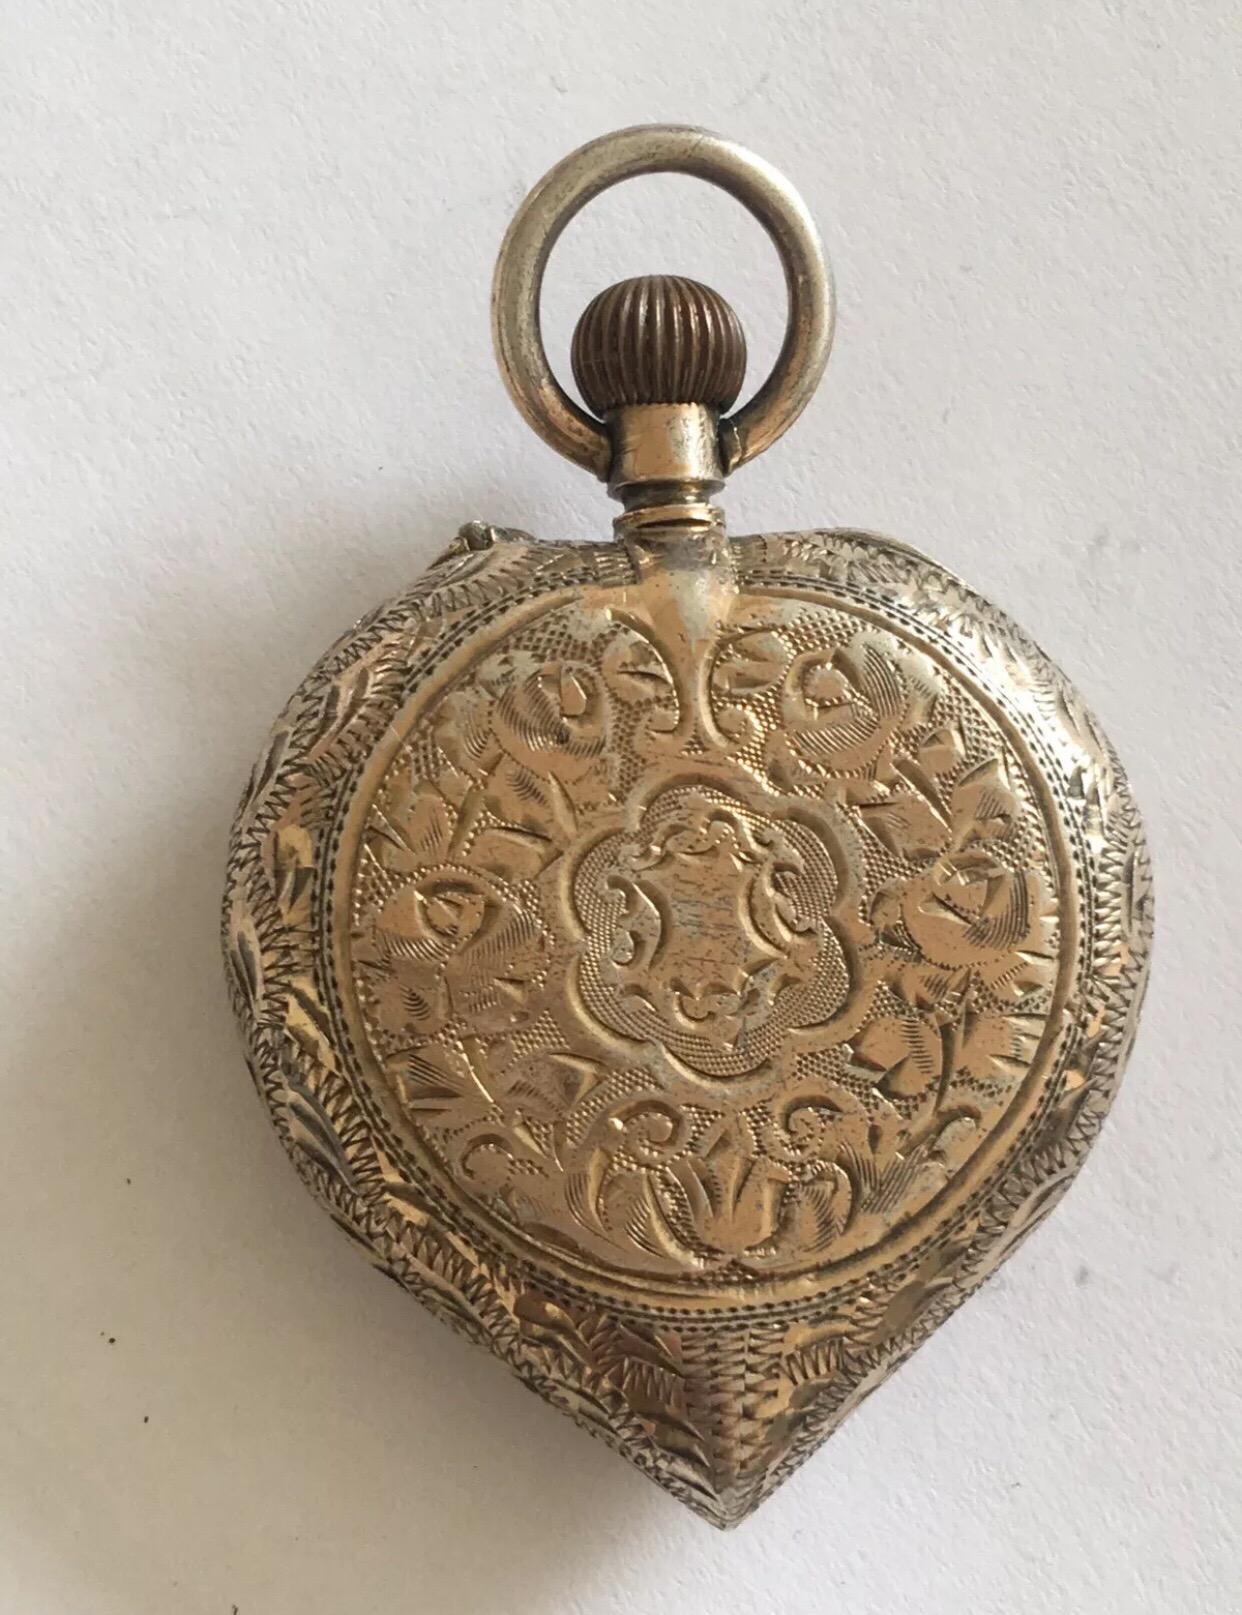 This beautiful antique silver heart shaped case and enamel dial pocket watch is in good working order.